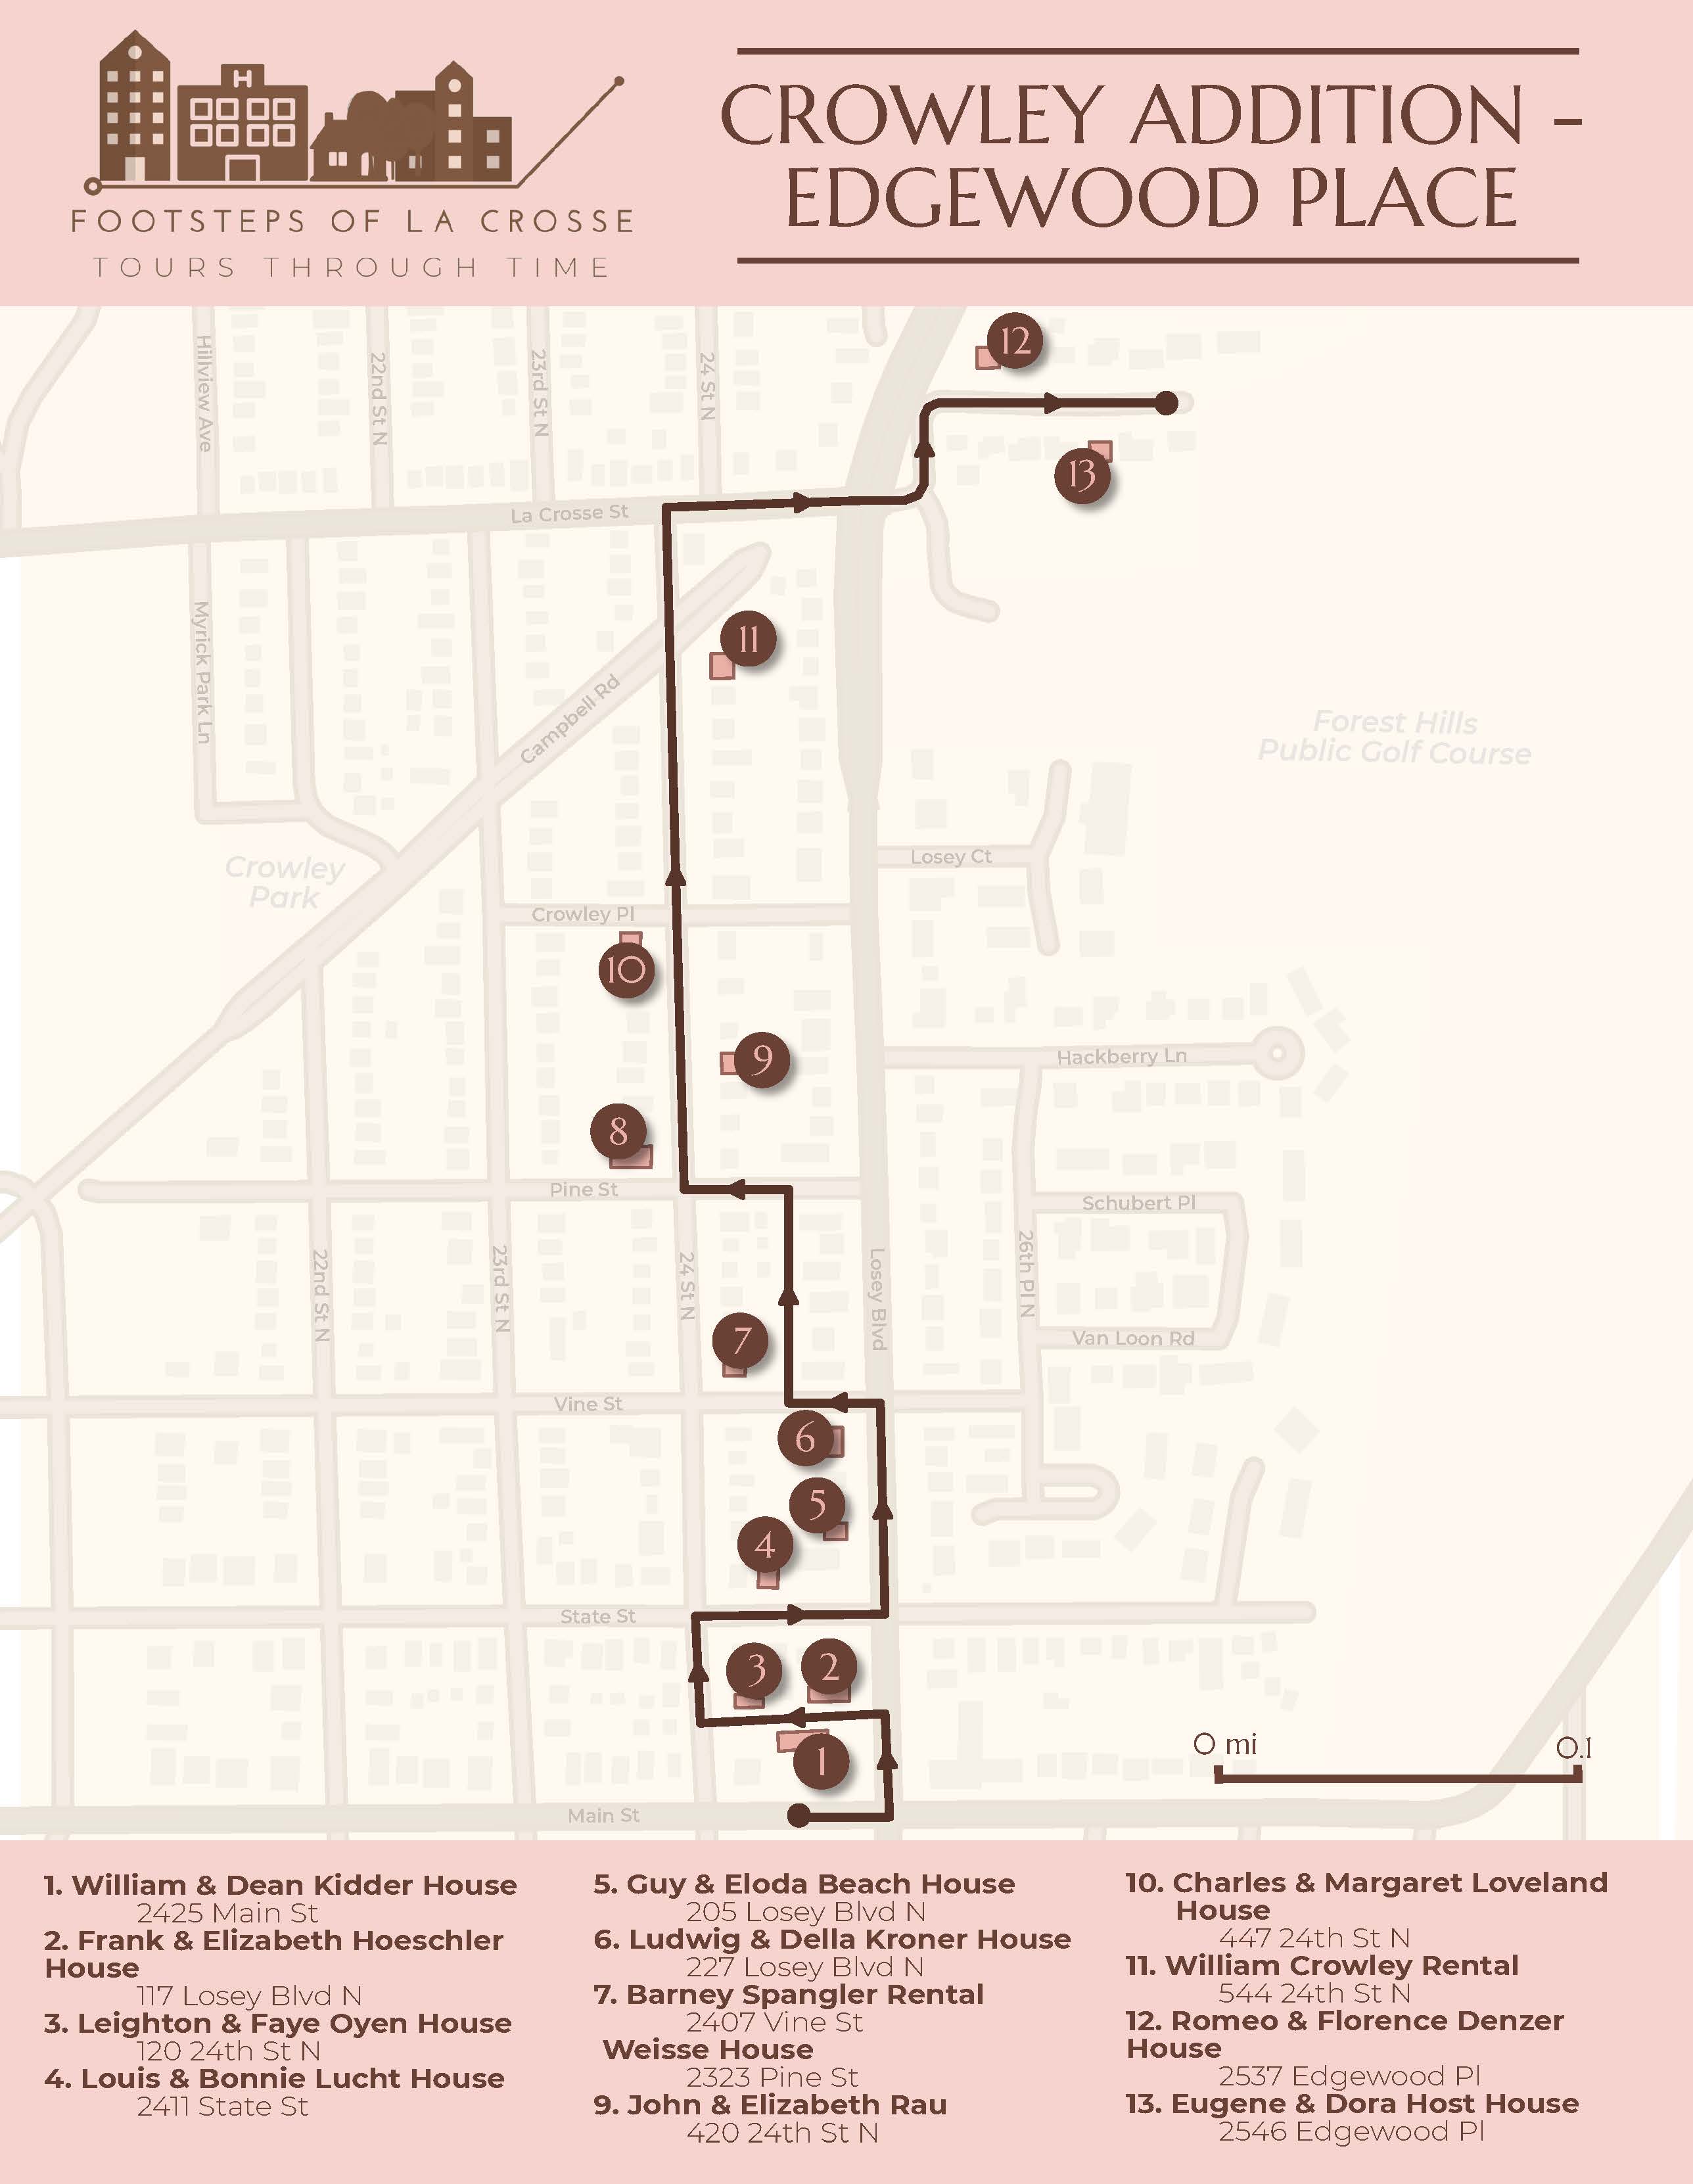 map showing crowley place and edgewood addition with route for tour